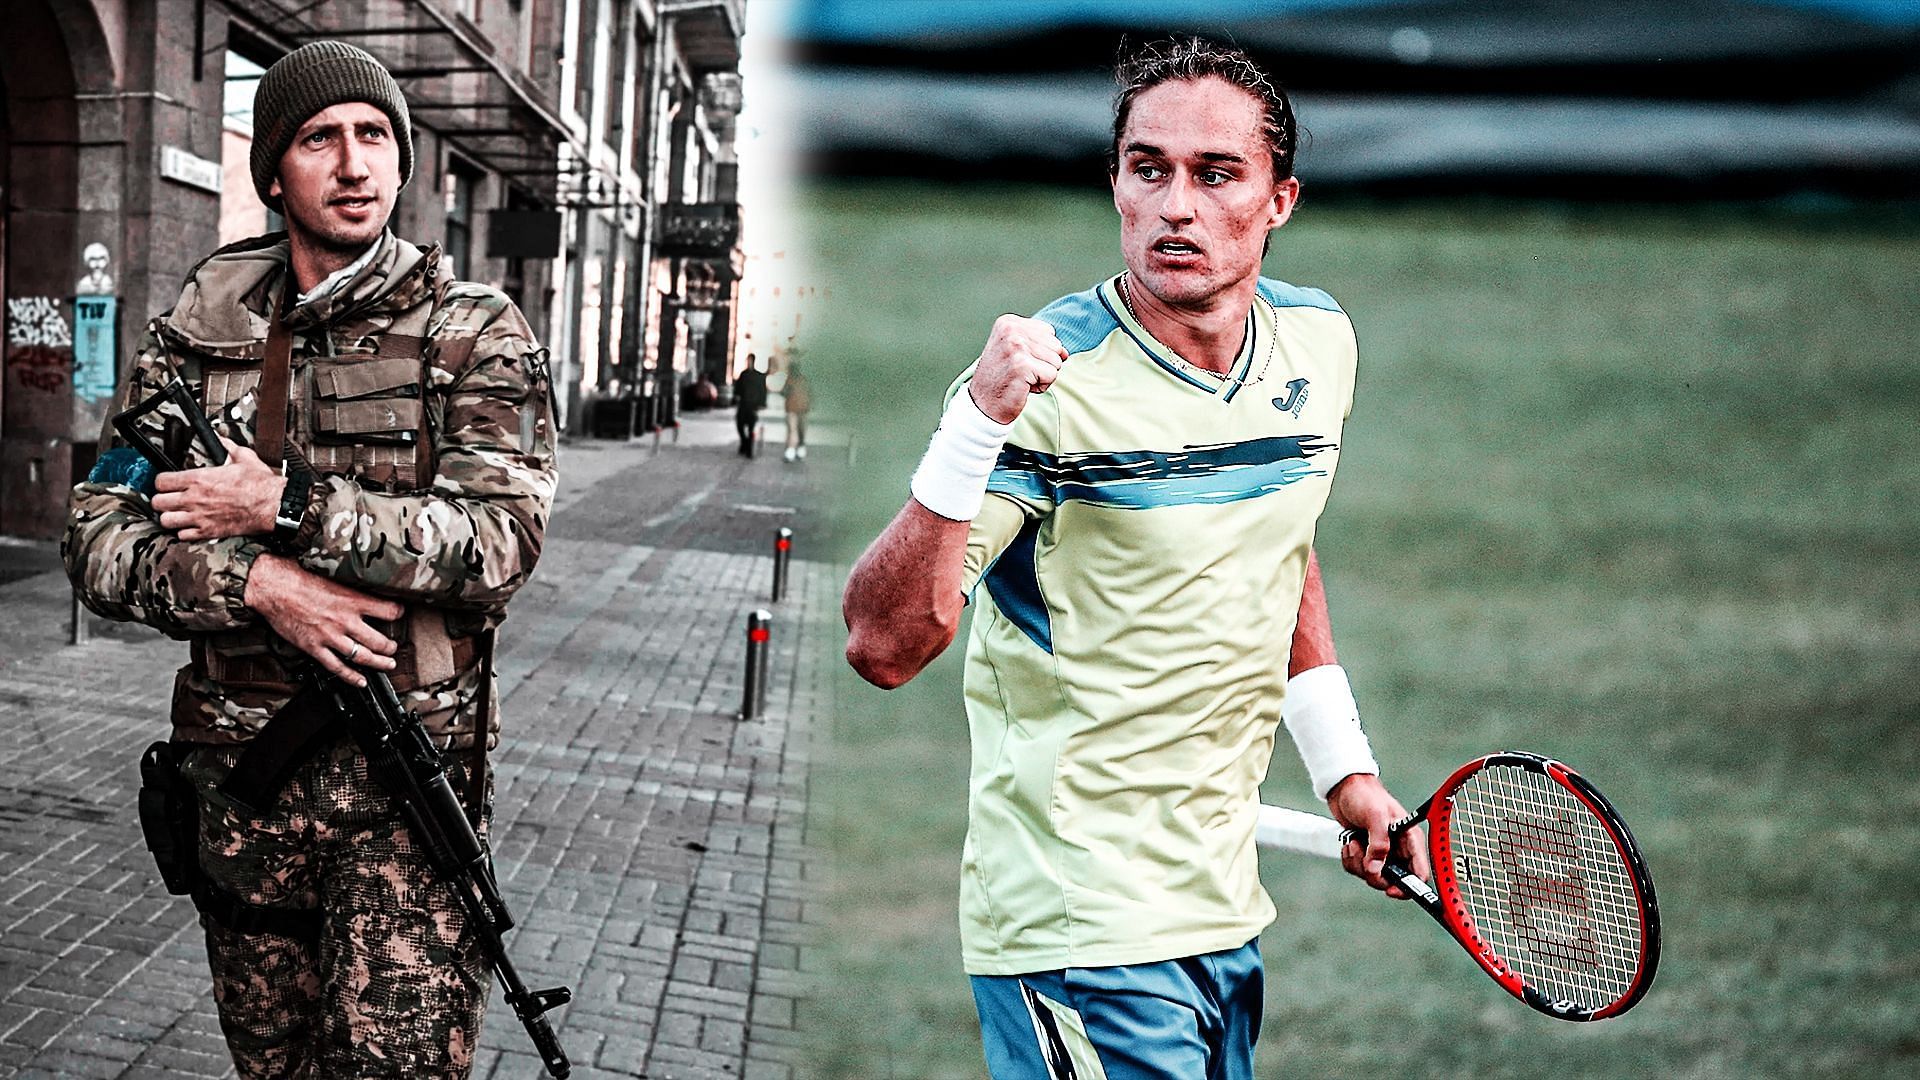 Alexandr Dolgopolov is going to serve in the Ukrainian army one again